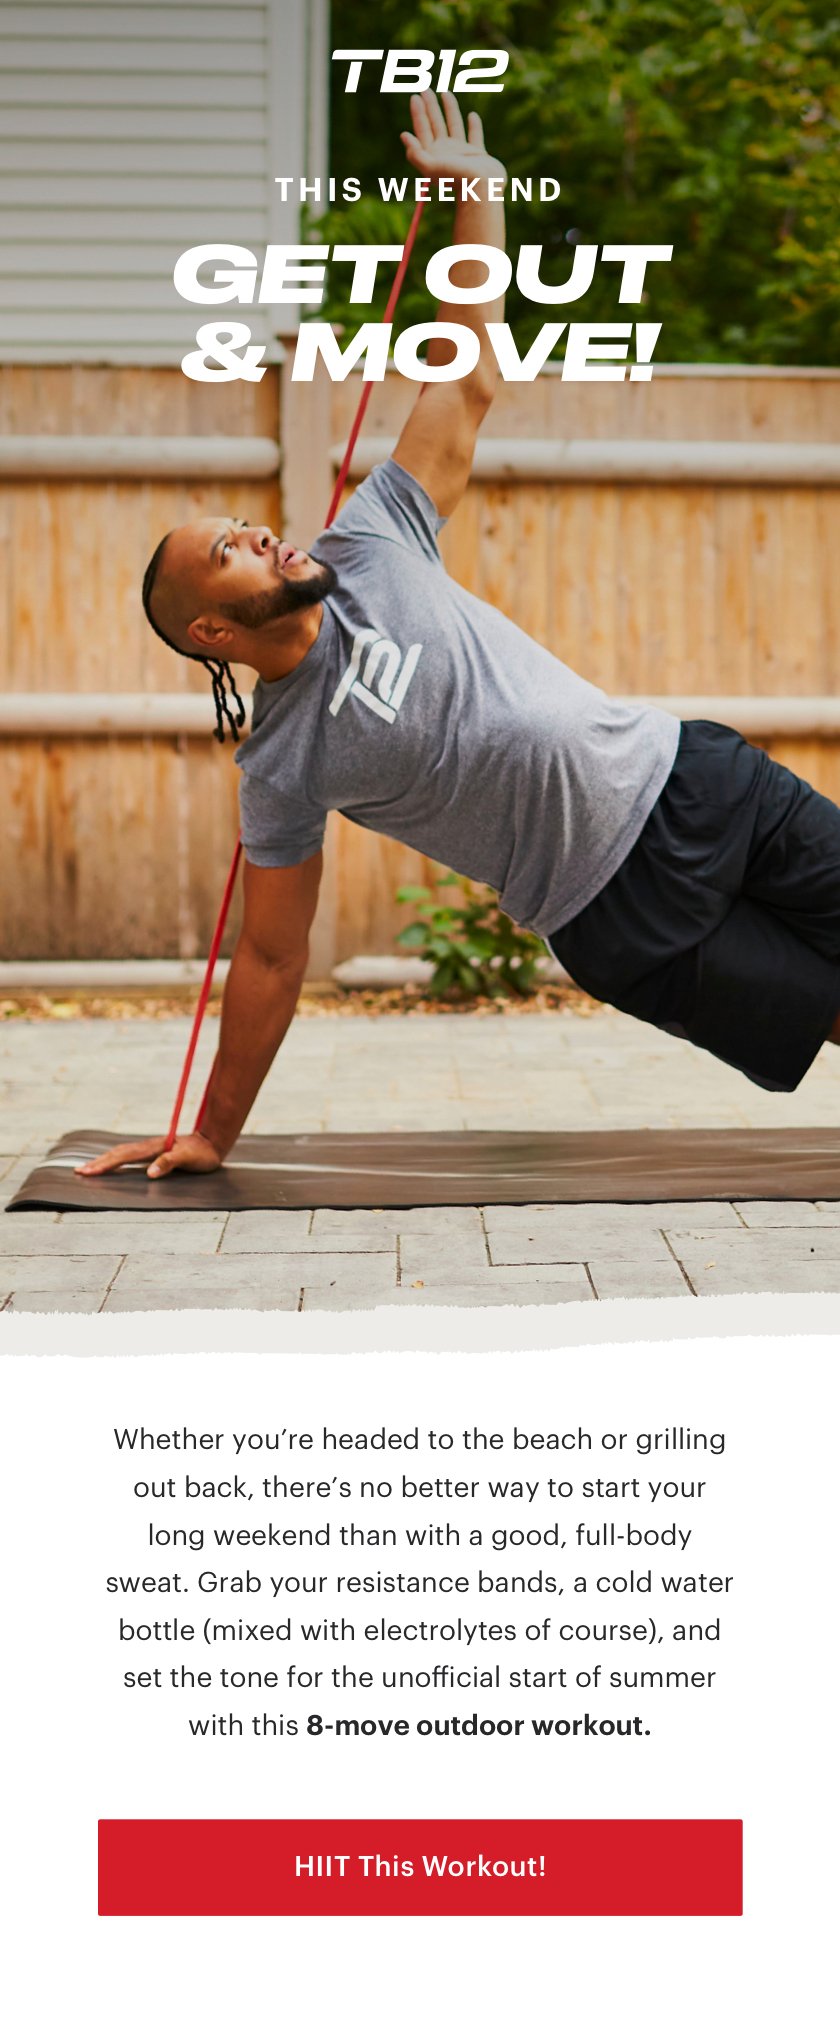 8-move outdoor workout